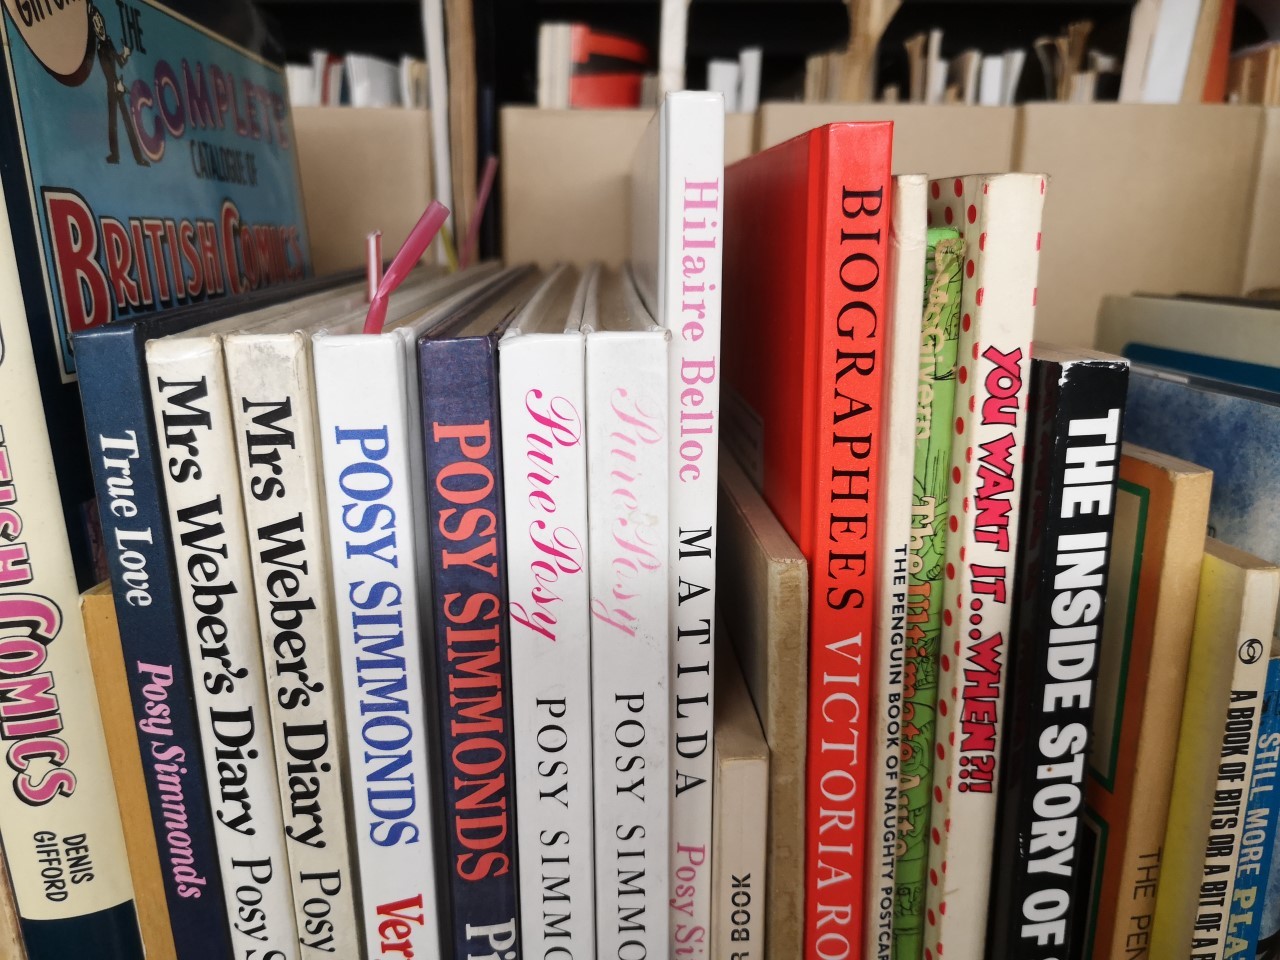 A photograph of books from the Giles library on a shelf.